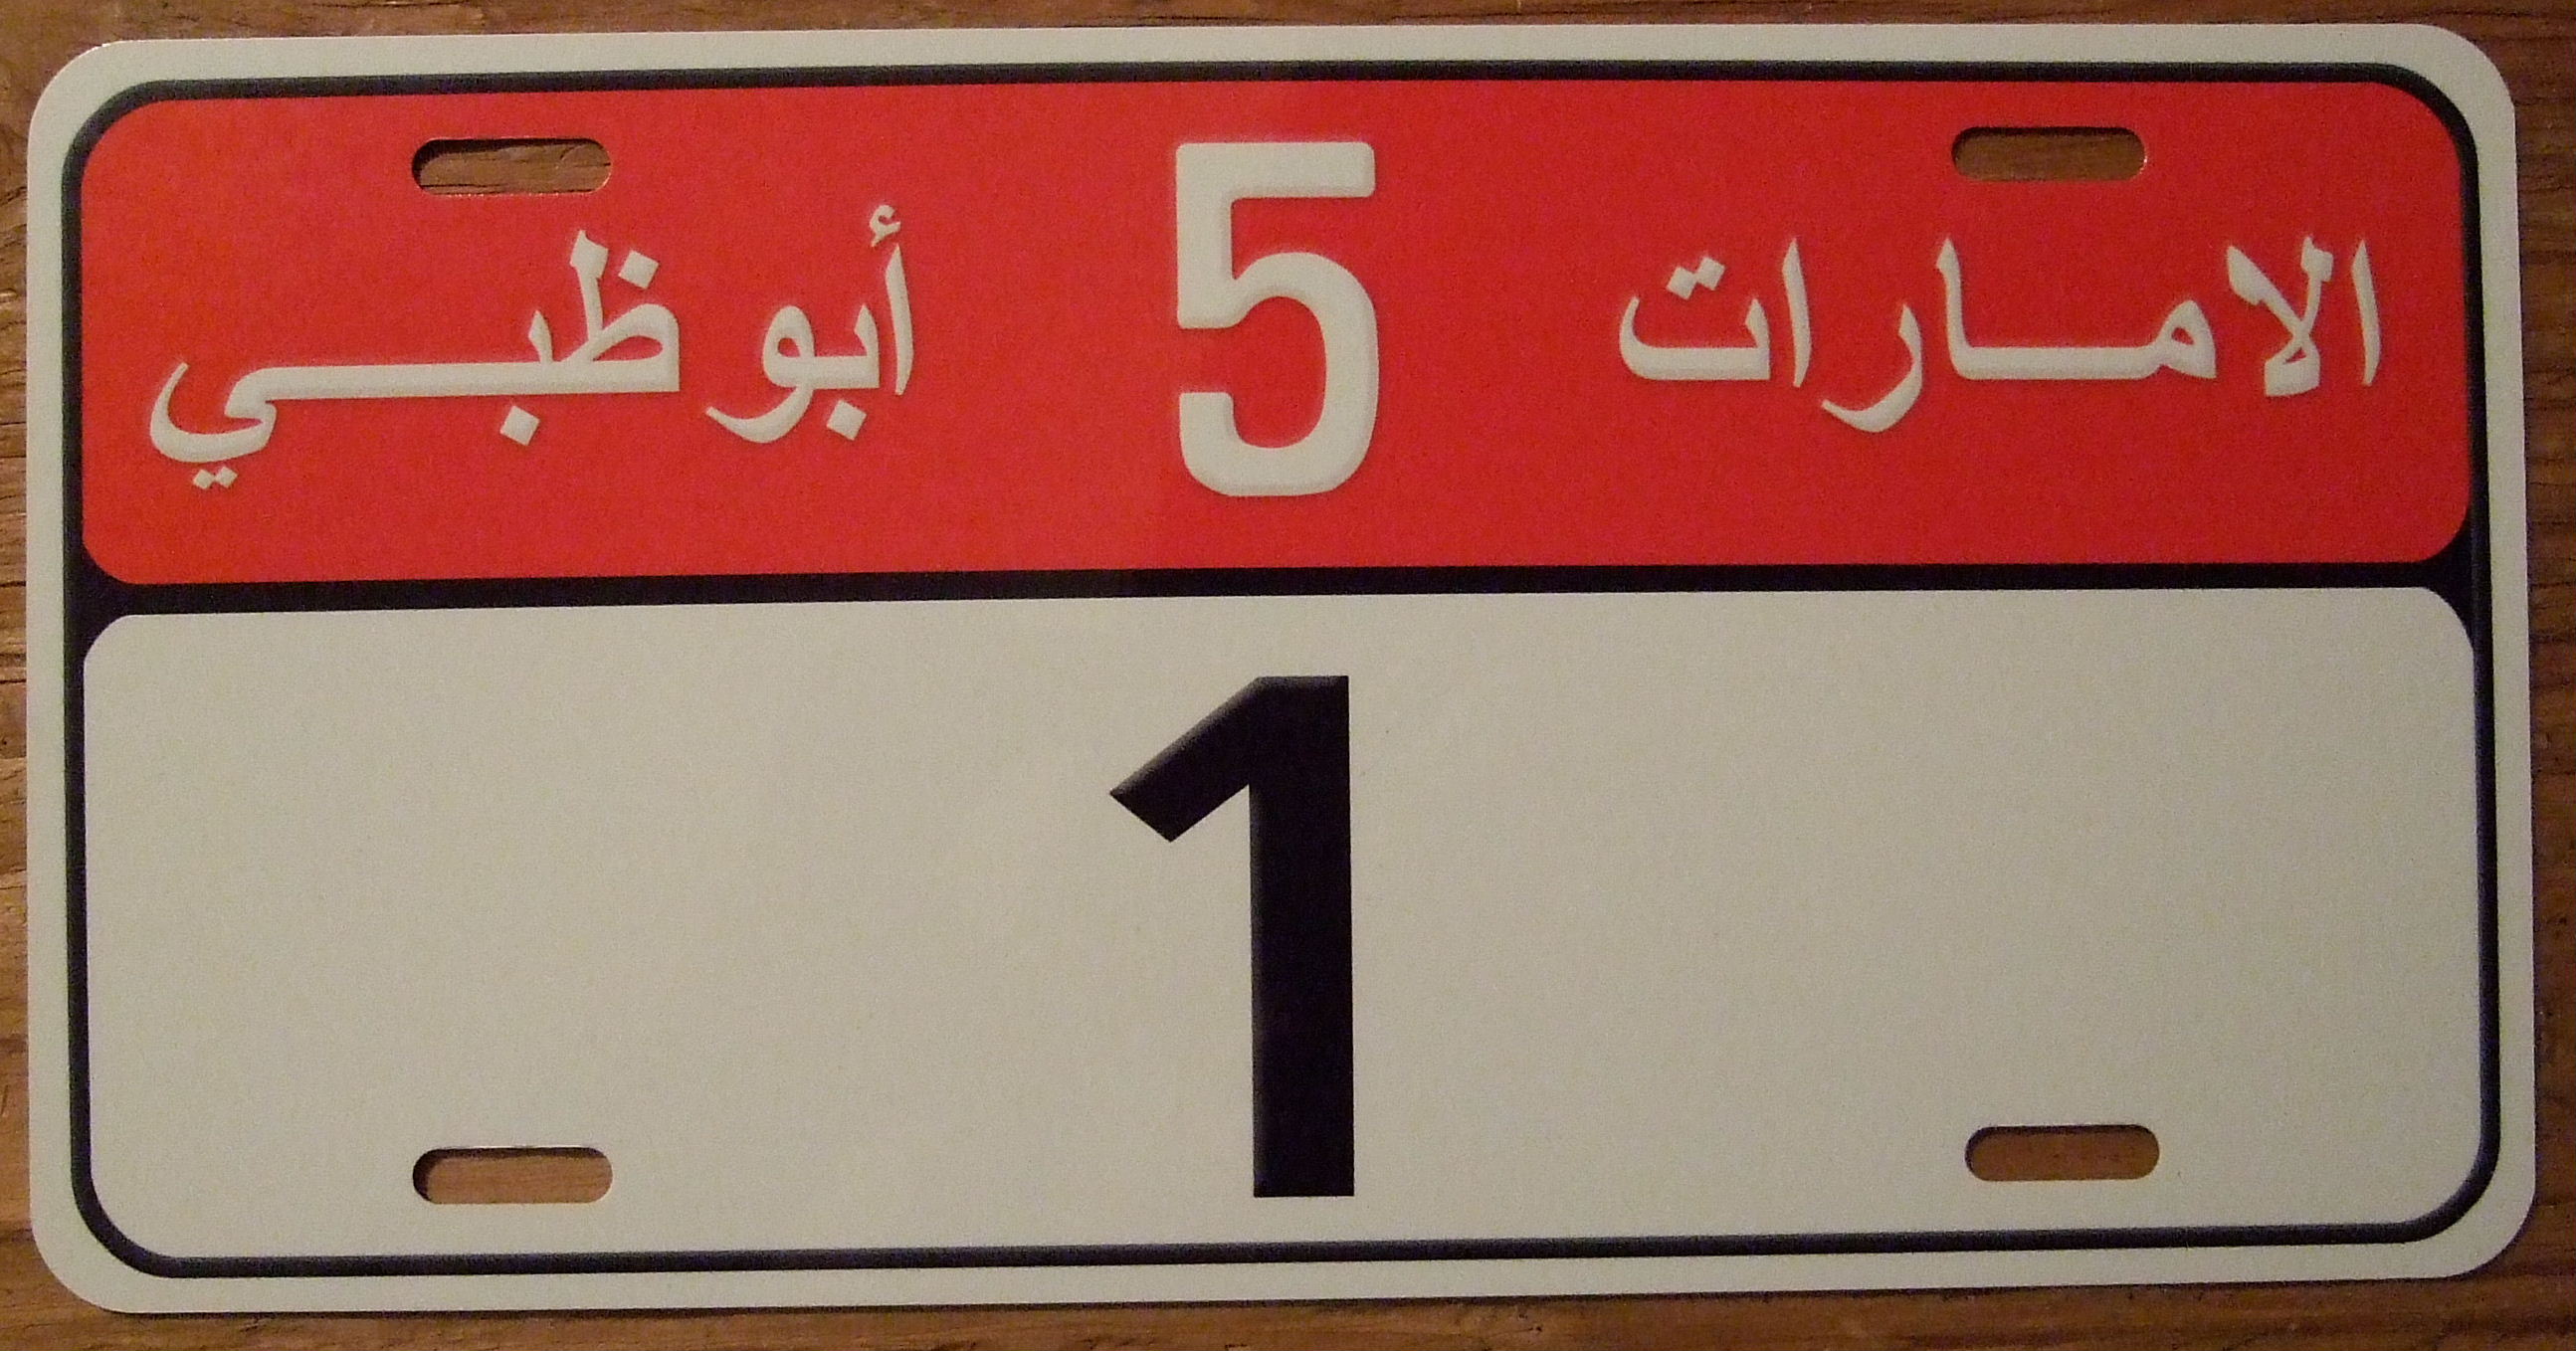 Replica_of_the_first_license_plate_of_Abu_Dhabi